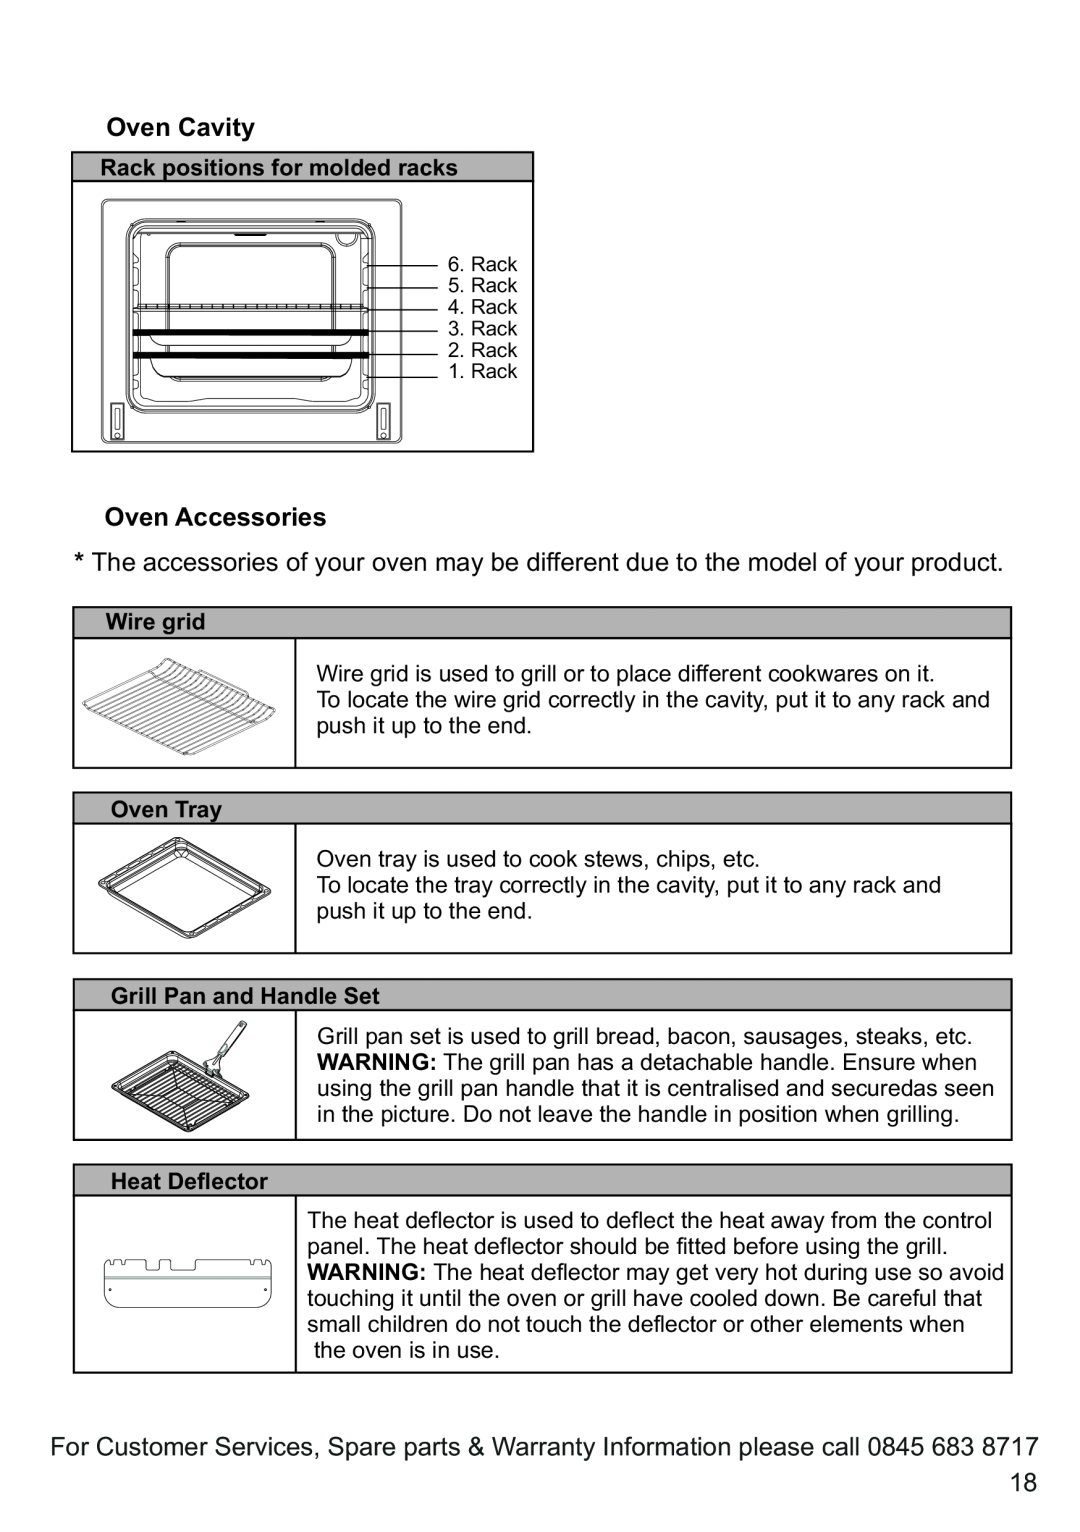 Russell Hobbs RHGC1 instruction manual Oven Cavity, Oven Accessories 